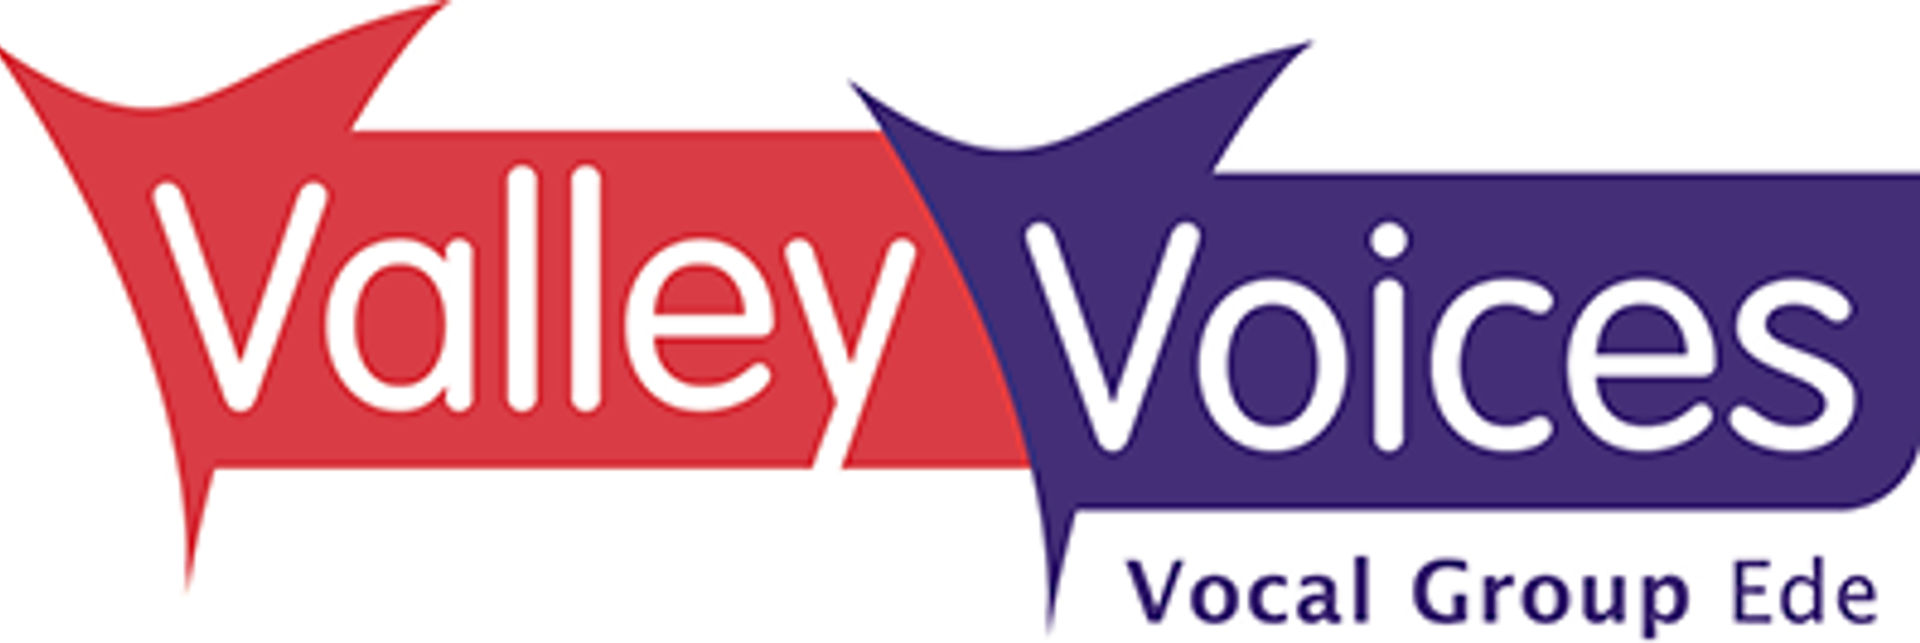 Valley Voices Vocal Group